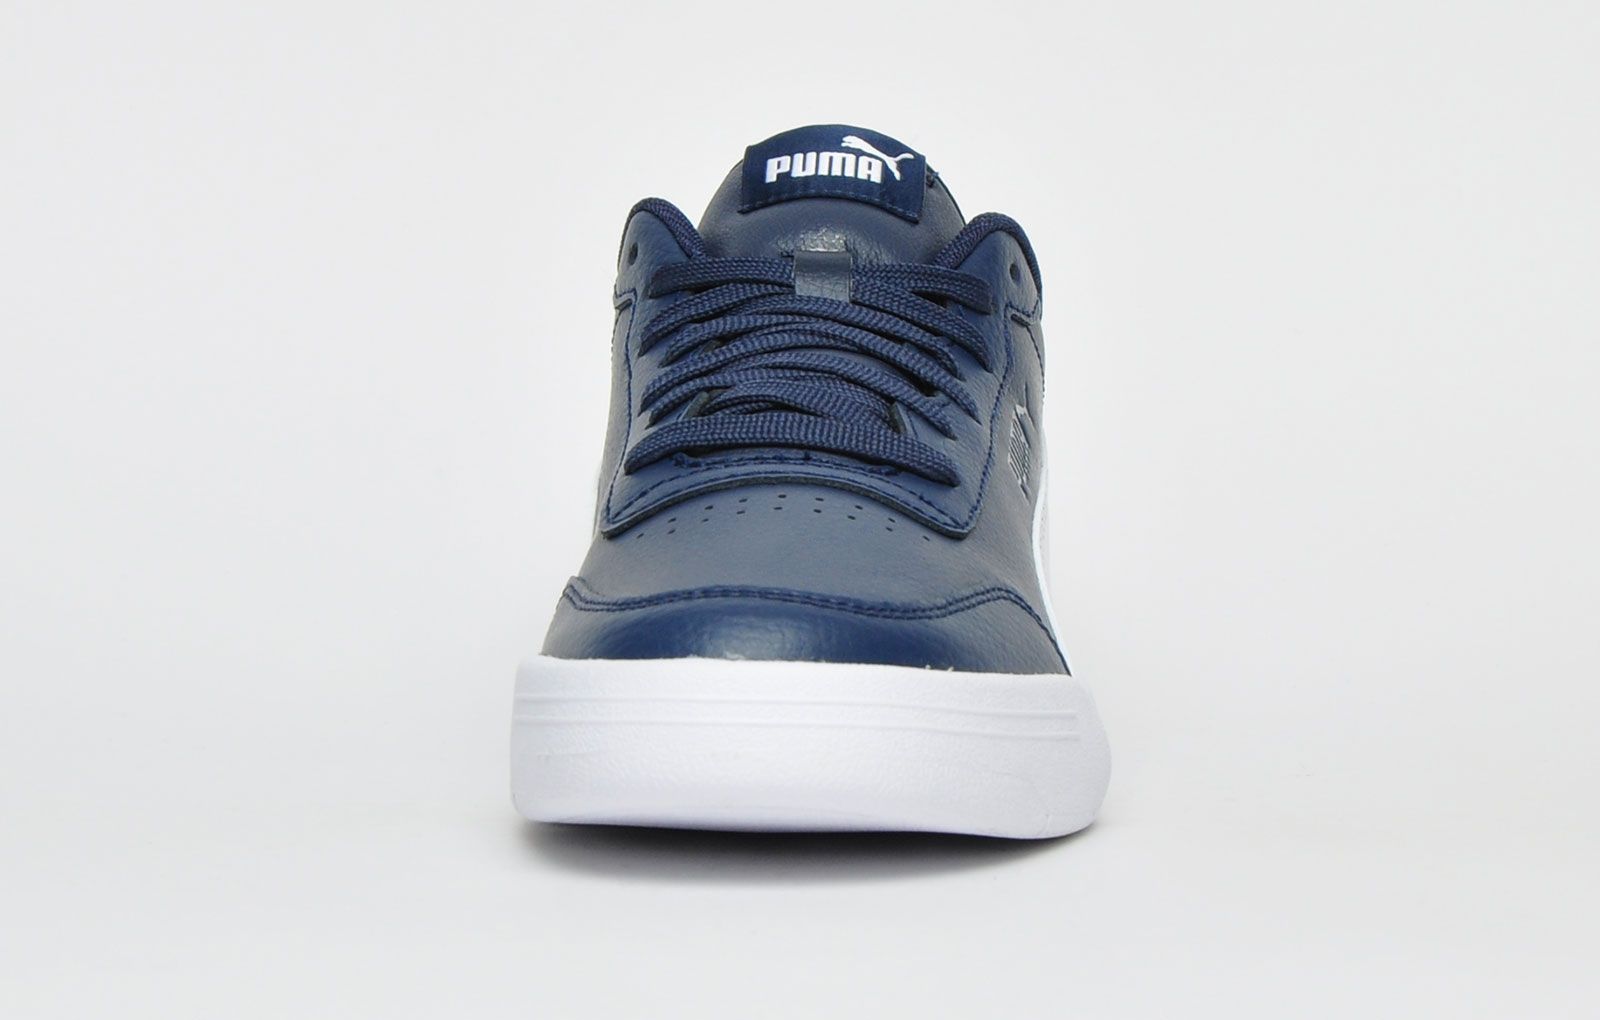 <p>The Puma Caracal is another classic from Puma’s court heritage constructed with a tennis inspired silhouette featuring a premium leather upper paired with a durable cupsole for a timeless look</p> <p>SoftFoam+ Puma’s comfort sockliner delivers long-lasting comfort that provides soft cushioning with every step you take.</p> <p>- Leather upper</p> <p> - Classic lace up system</p> <p>- SoftFoam+ comfort sockliner</p> <p>- Padded tongue and heel</p> <p>- Durable grippy outsole</p> <p>- Puma branding throughout</p>